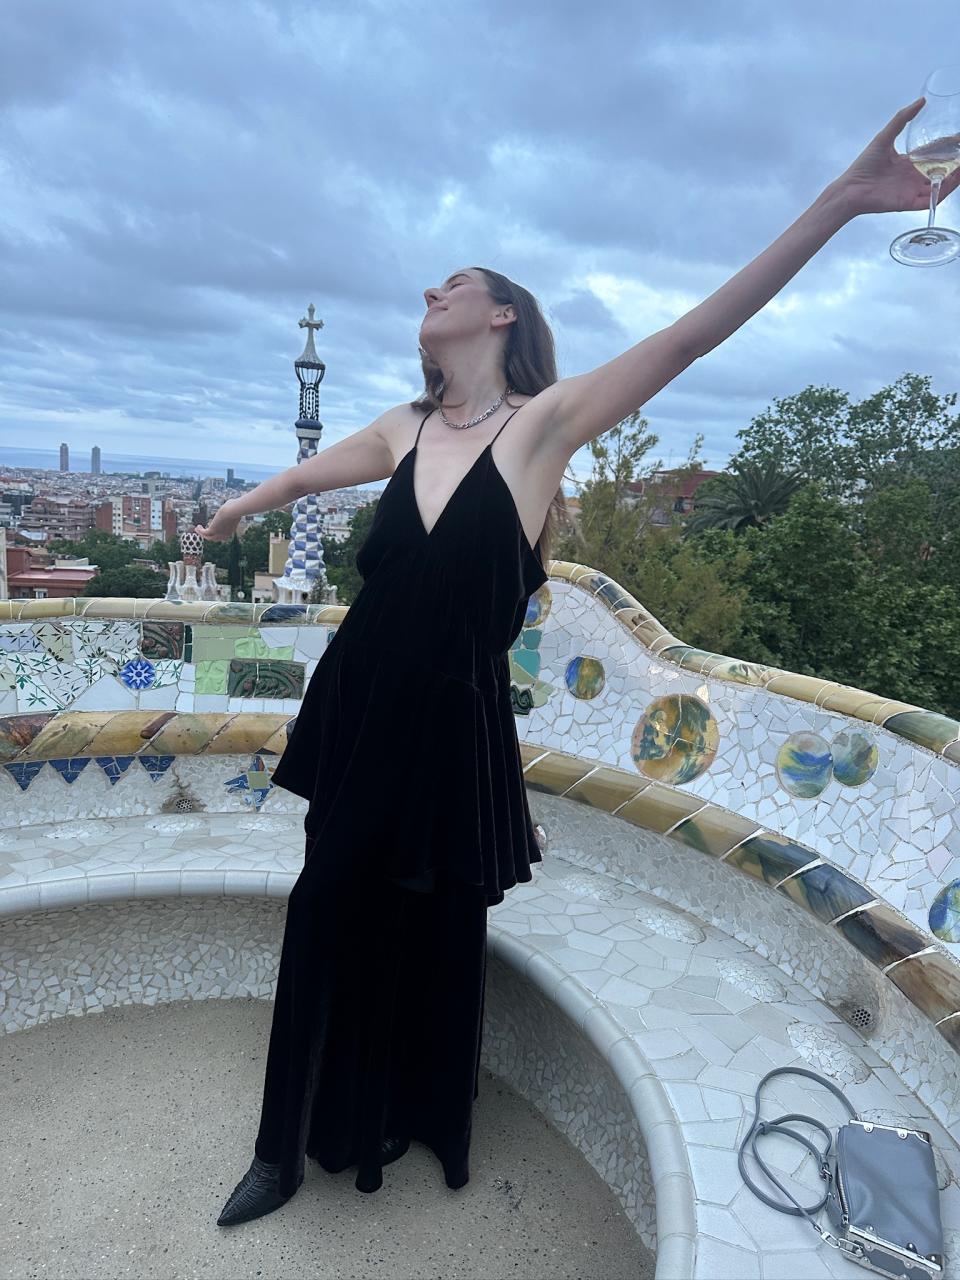 “I took a photo in this exact spot when I was 22!” says Alana Haim. “10 years later and the view is still breathtaking!”